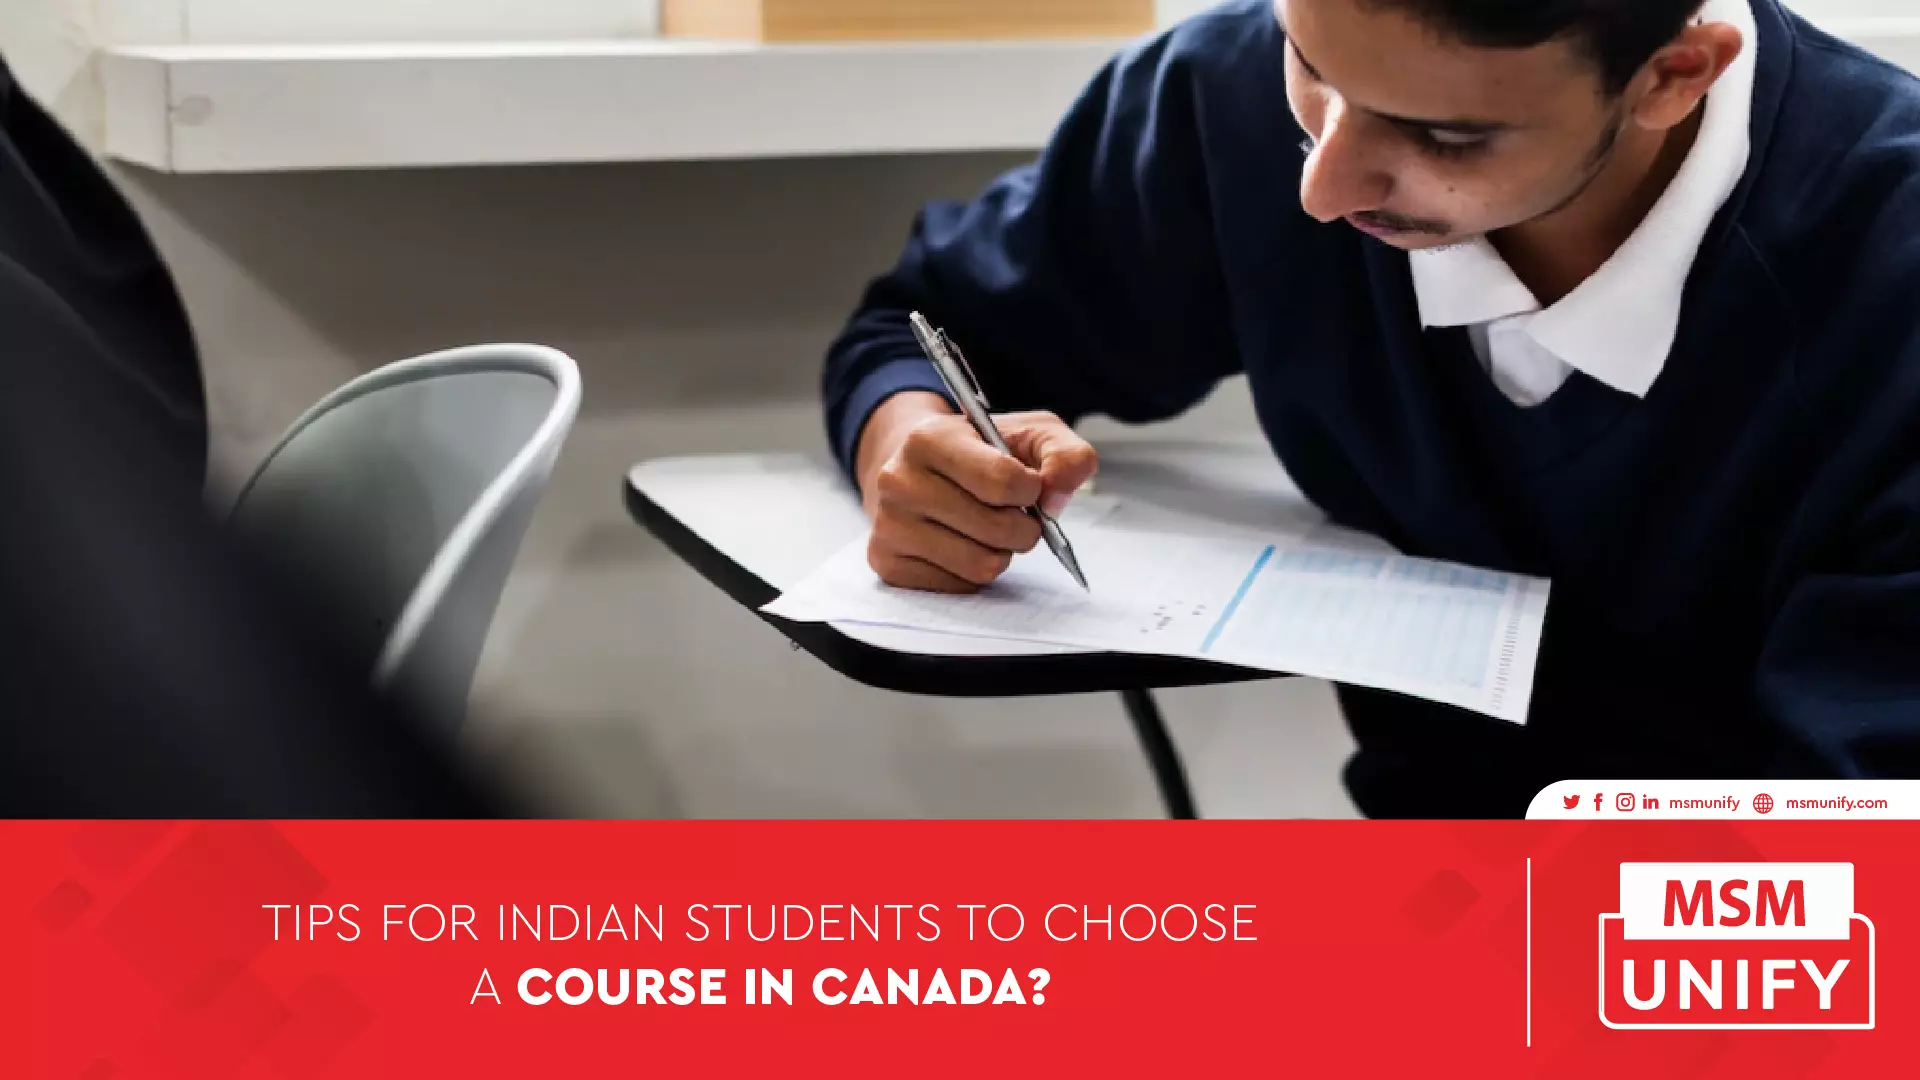 010623 MSM Unify Tips for Indian Students to choose a course in Canada 01